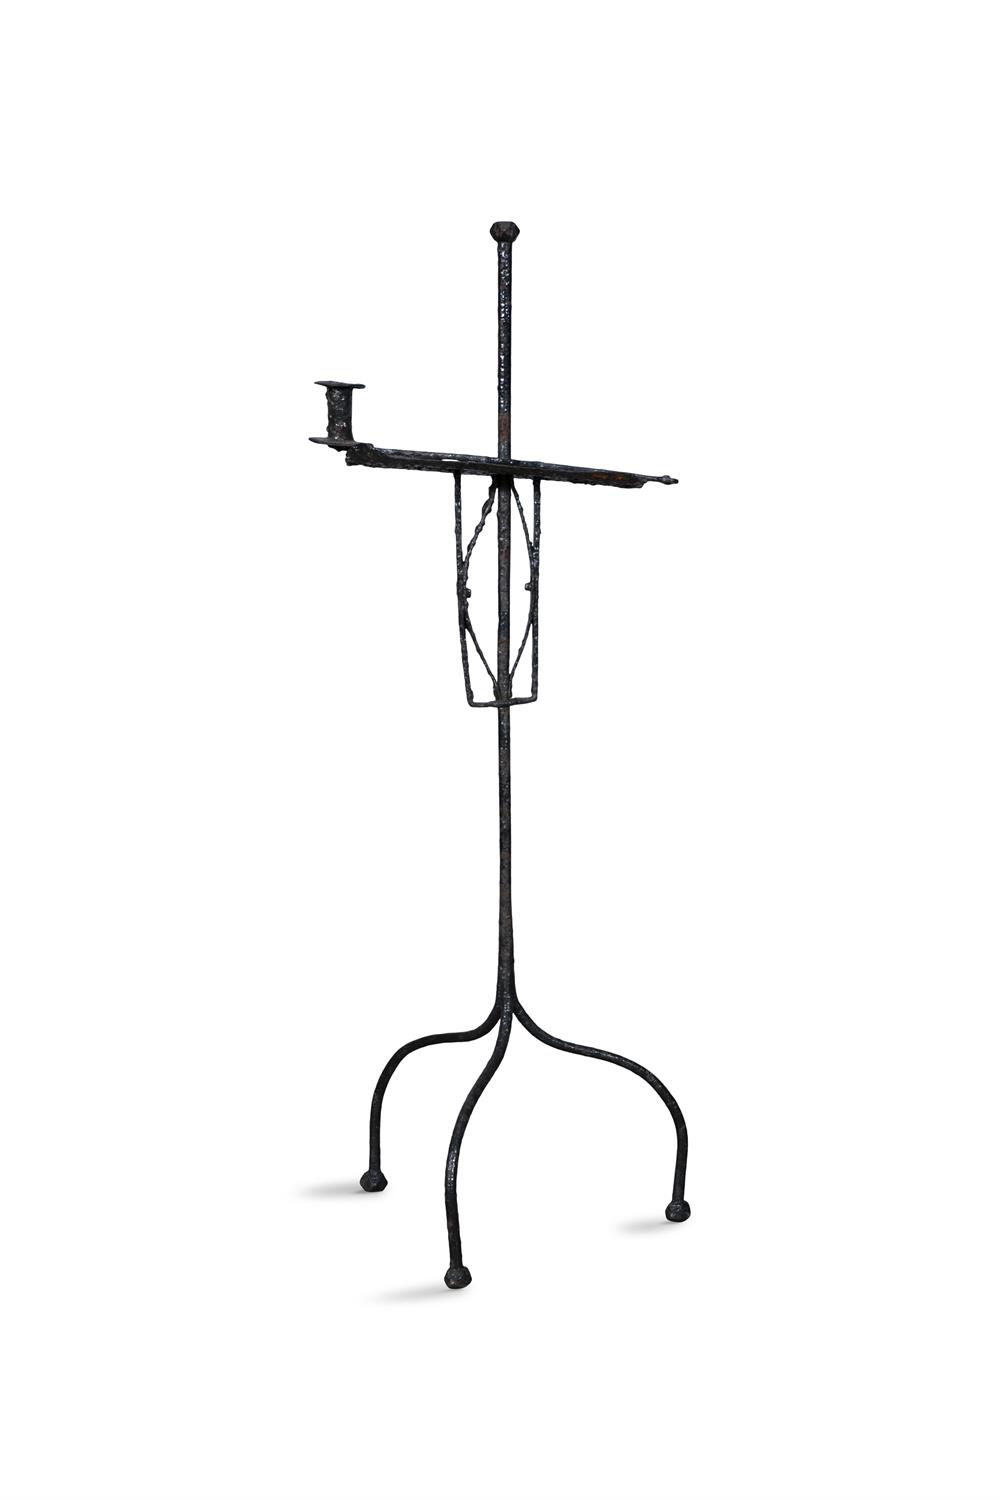 A WROUGHT IRON CANDLE STAND ON TRIPOD BASE, 109cm high